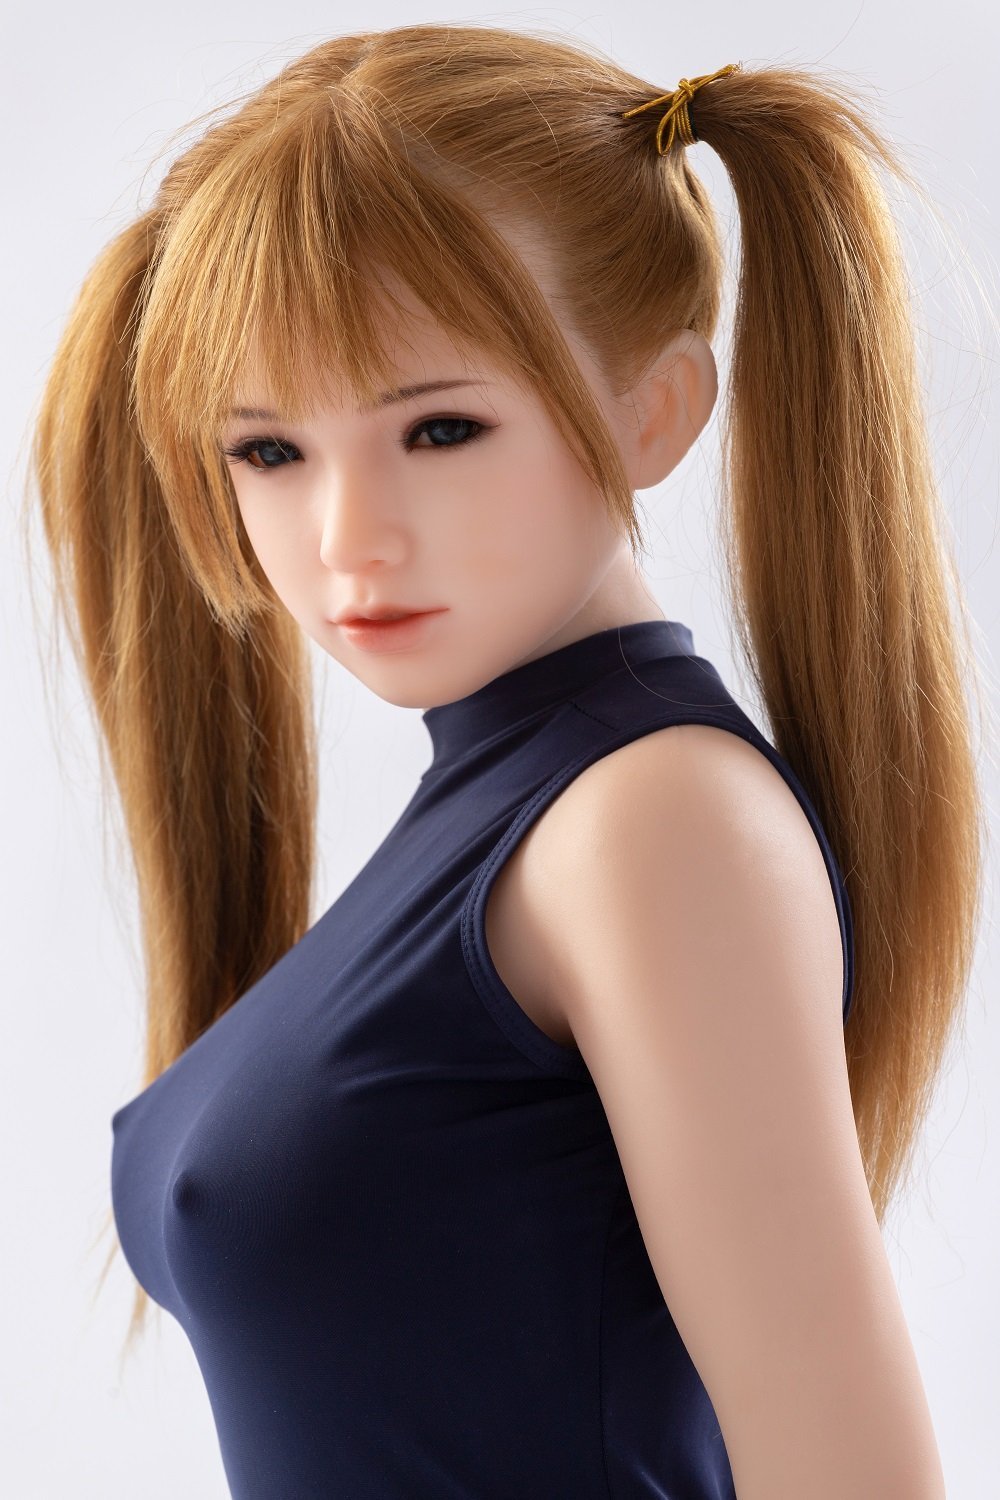 Sanhui 161cm yellow hair beautiful girl open mouth small boobs sex doll-Minjing - tpesexdoll.com